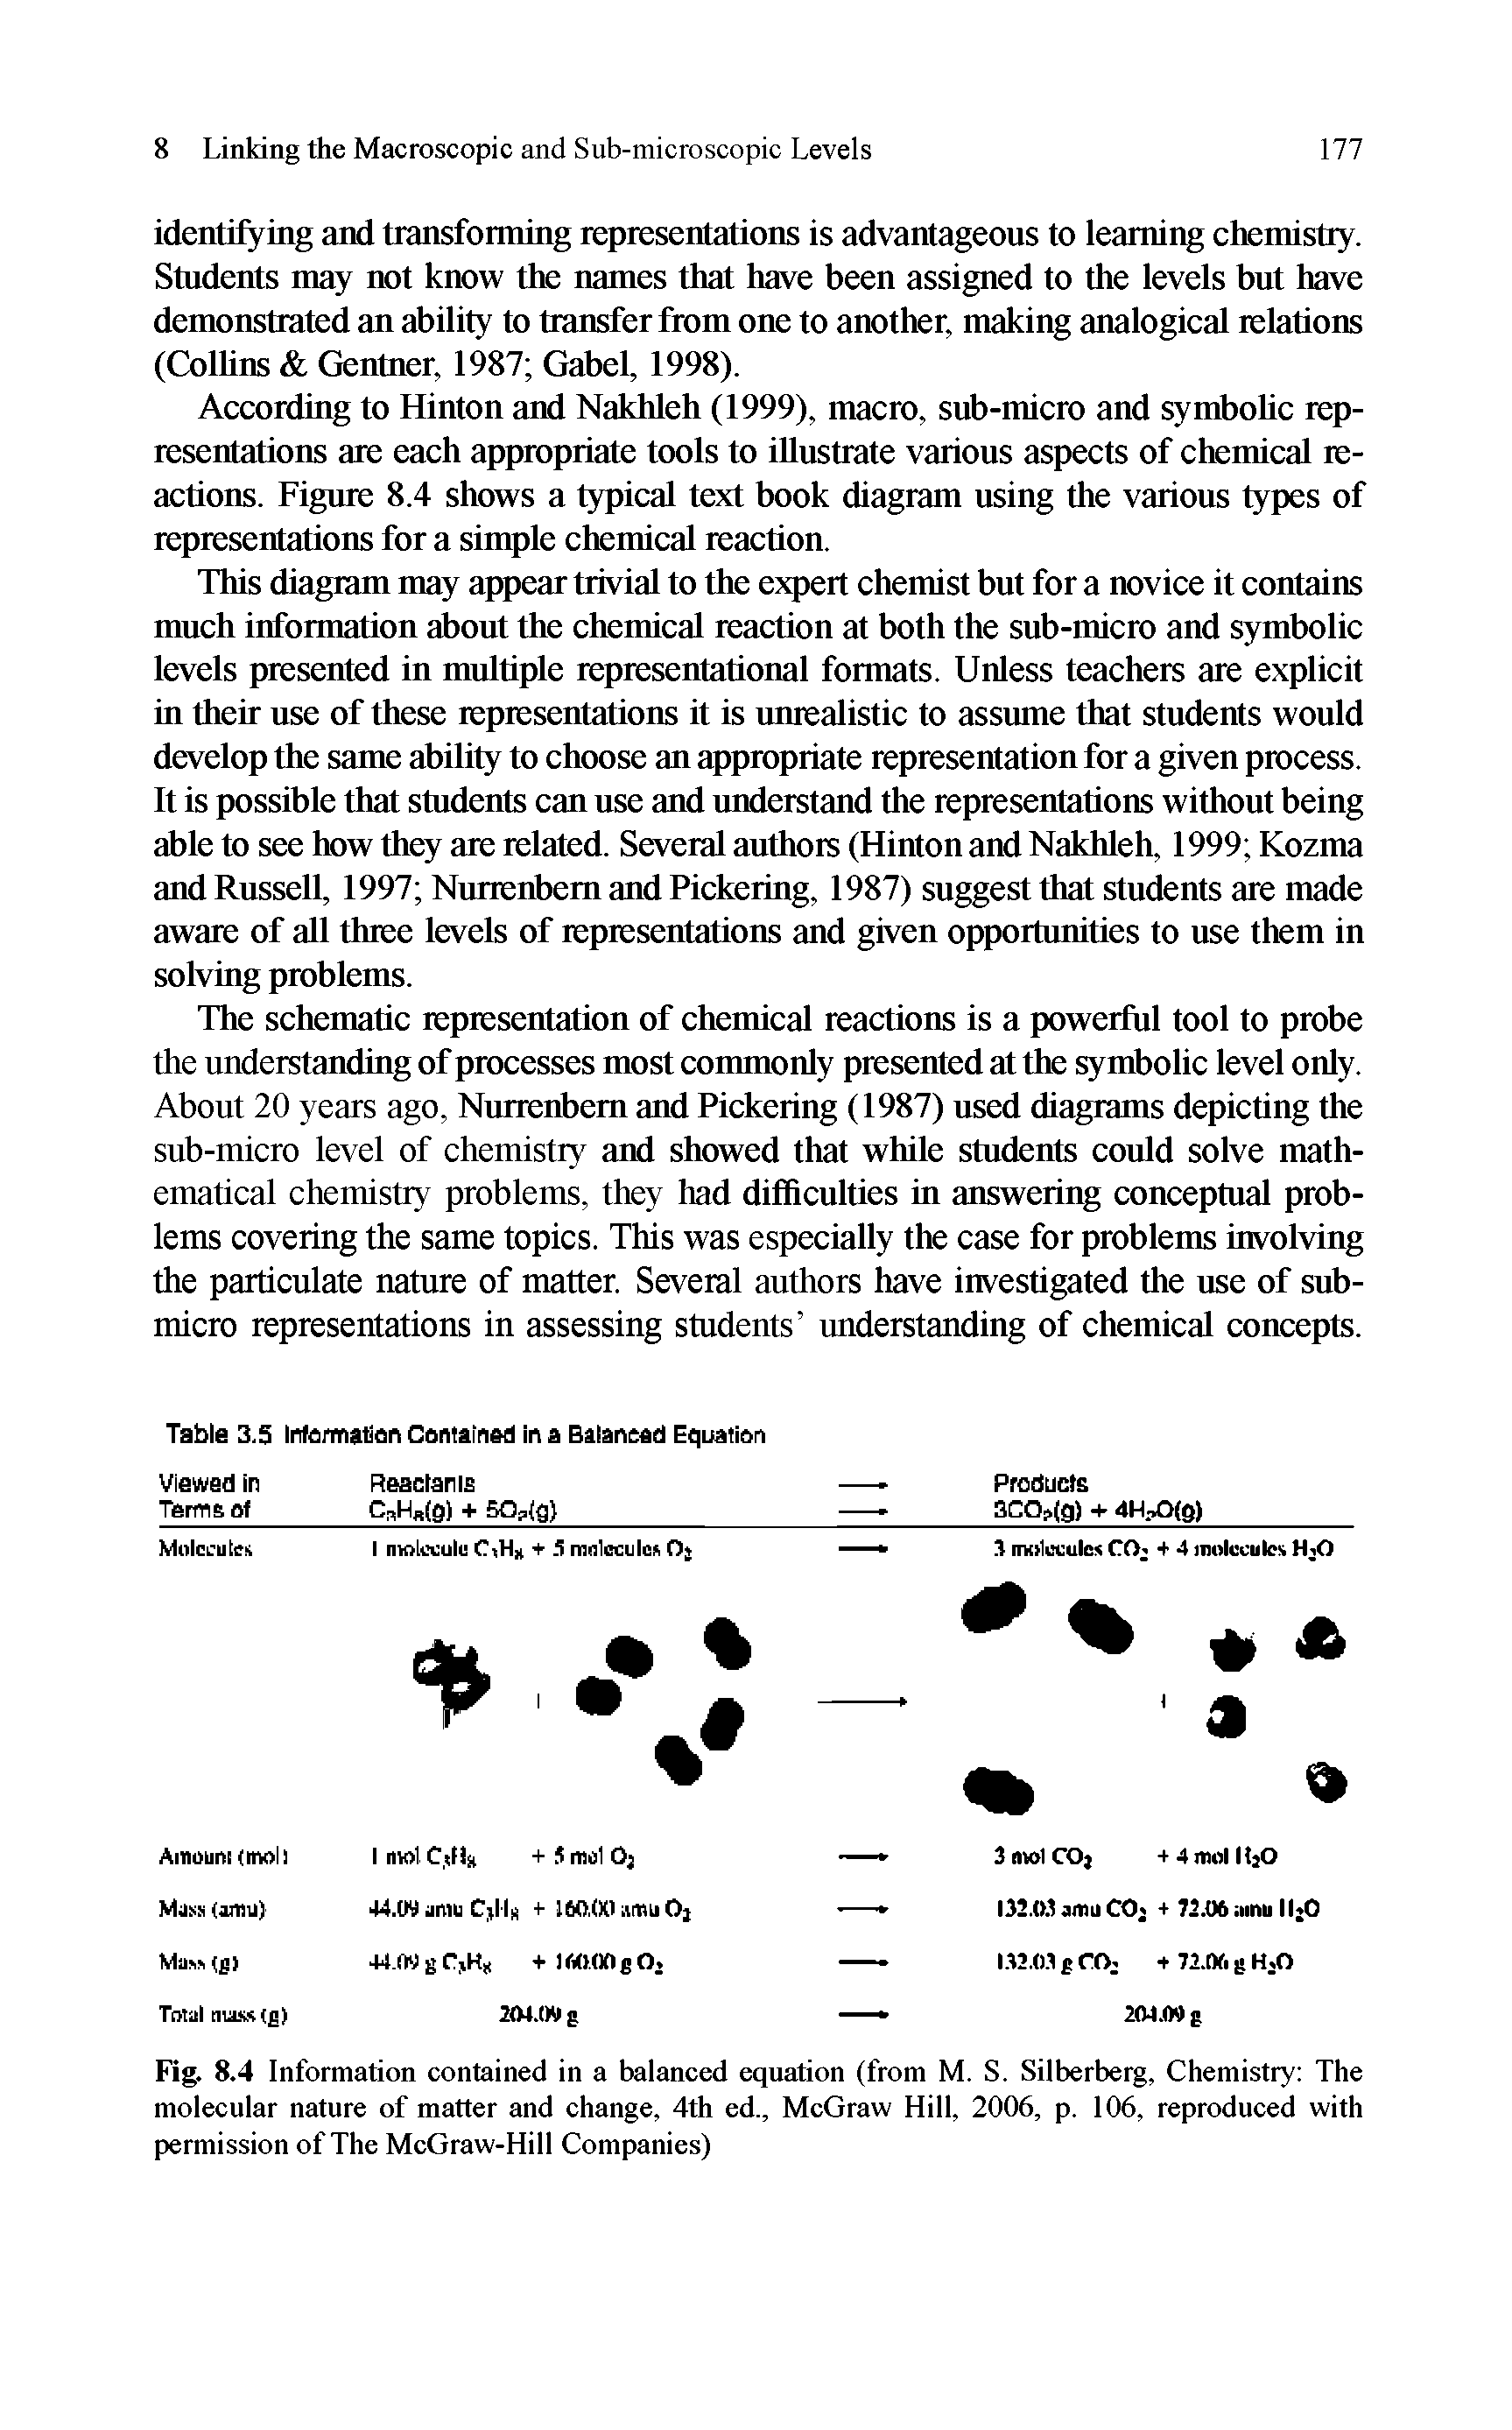 Fig. 8.4 Information contained in a balanced equation (from M. S. Silberberg, Chemistry The molecular nature of matter and change, 4th ed., McGraw Hill, 2006, p. 106, reproduced with permission of The McGraw-Hill Companies)...